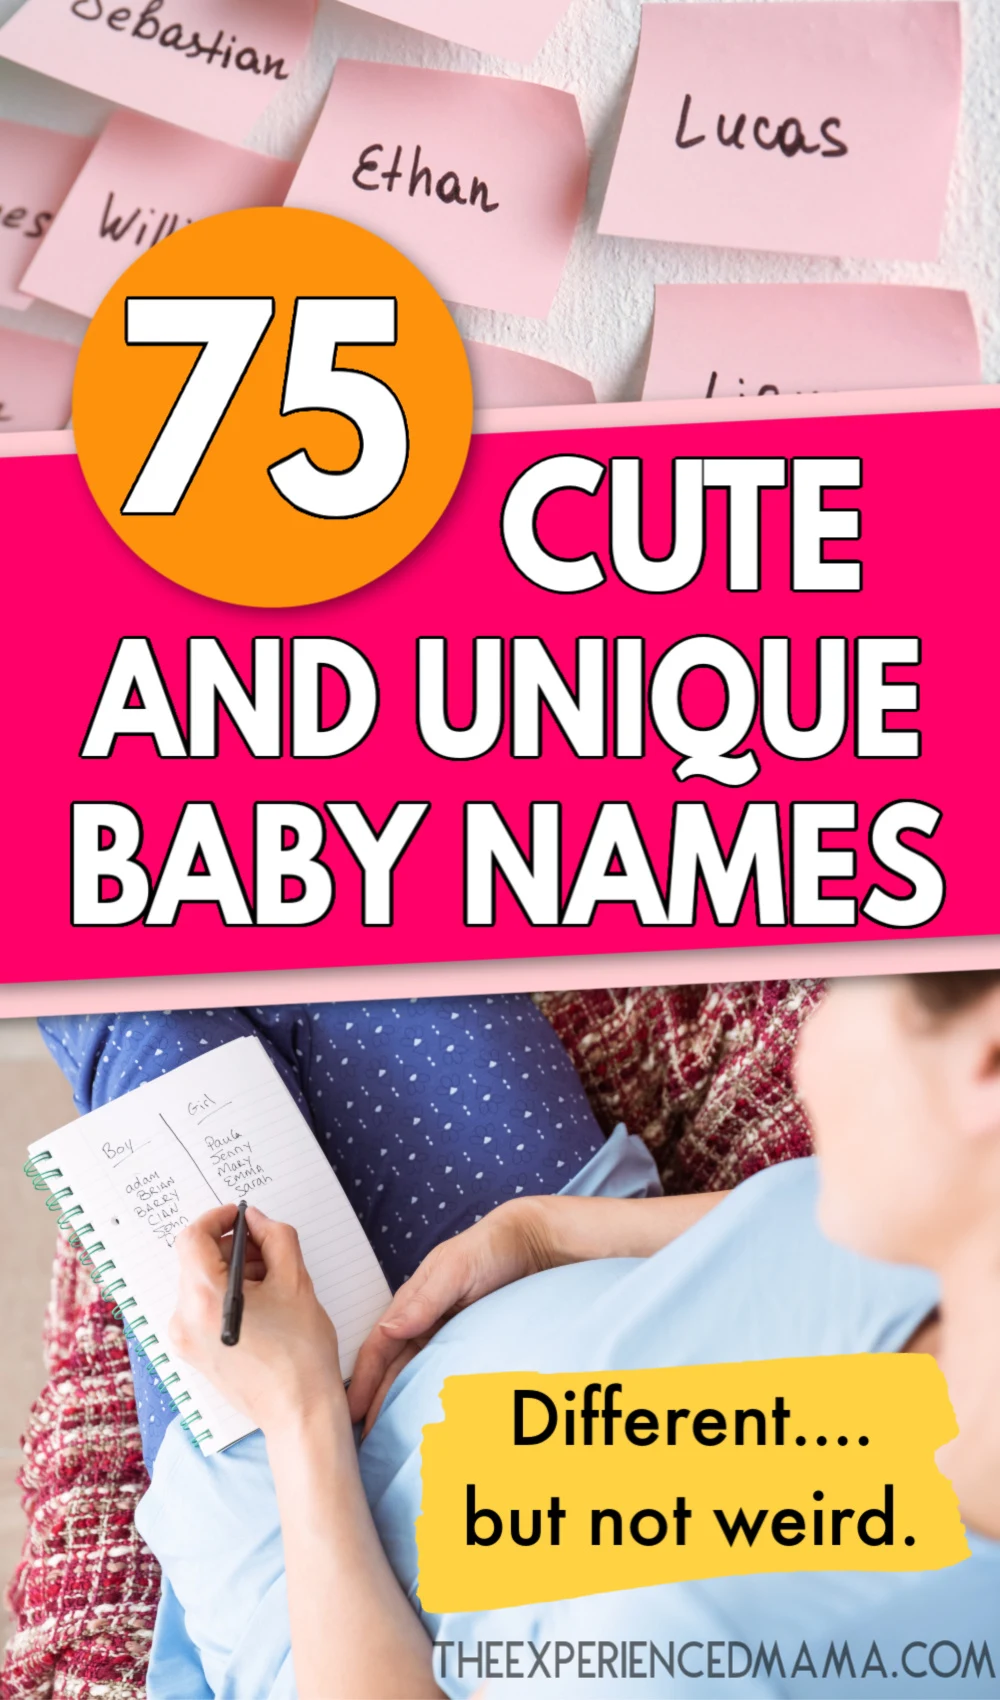 pink post it notes with baby names on wall and woman writing name list, with text overlay "75 cute and unique baby names"